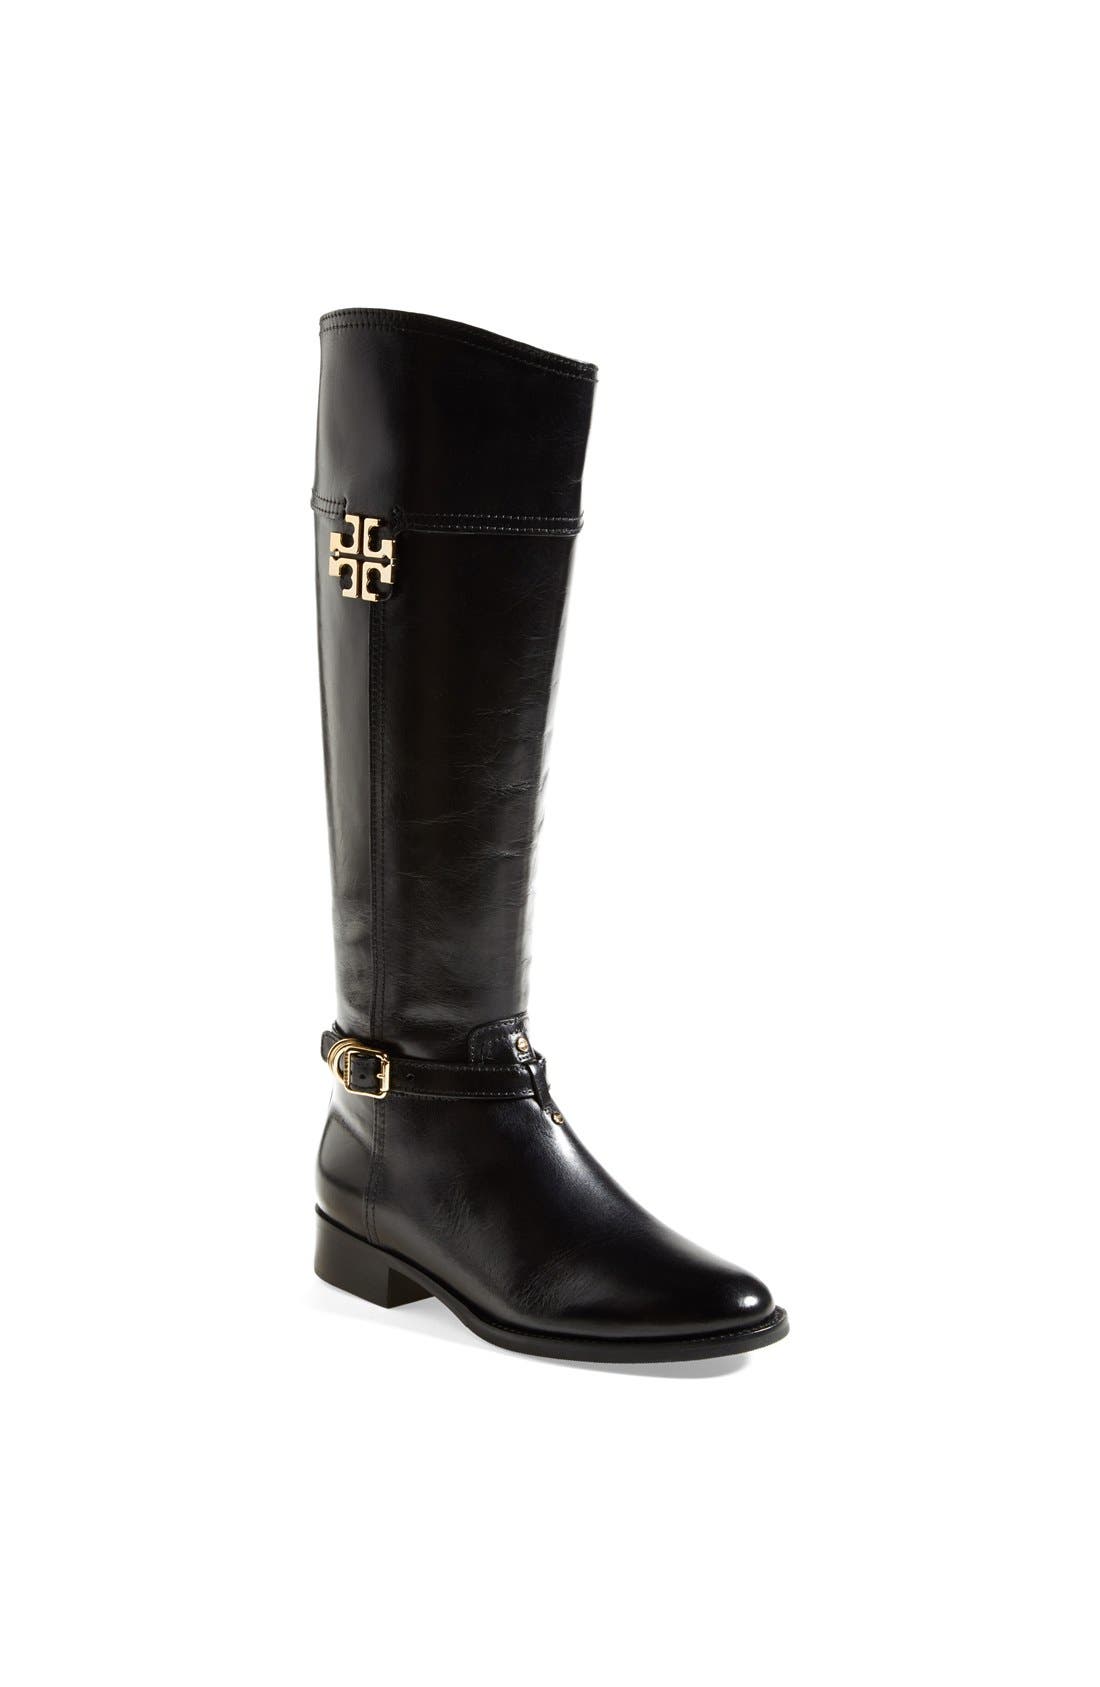 tory burch boots nordstrom